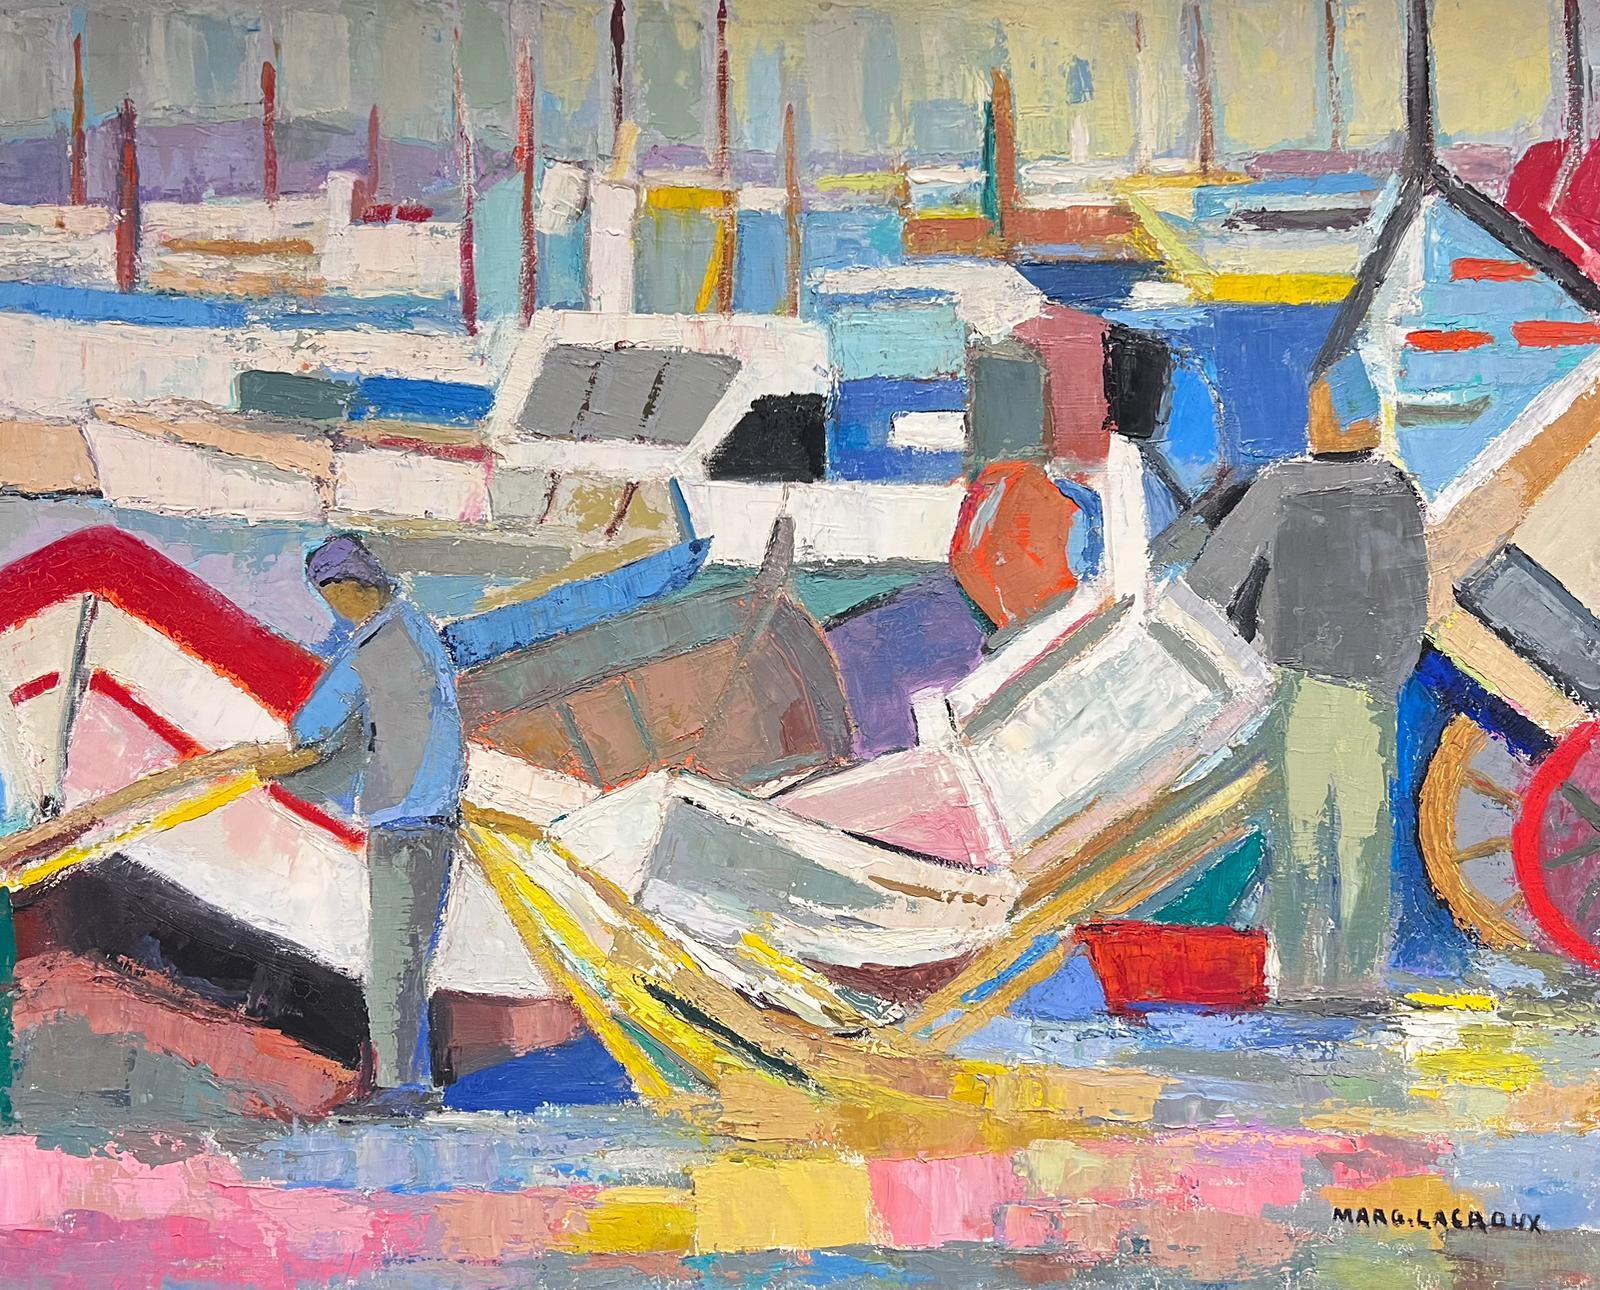 Marguerite Lacroux Landscape Painting - Huge Mid 20th Century French Cubist Signed Oil Fisherman with Boats Harbor Quay